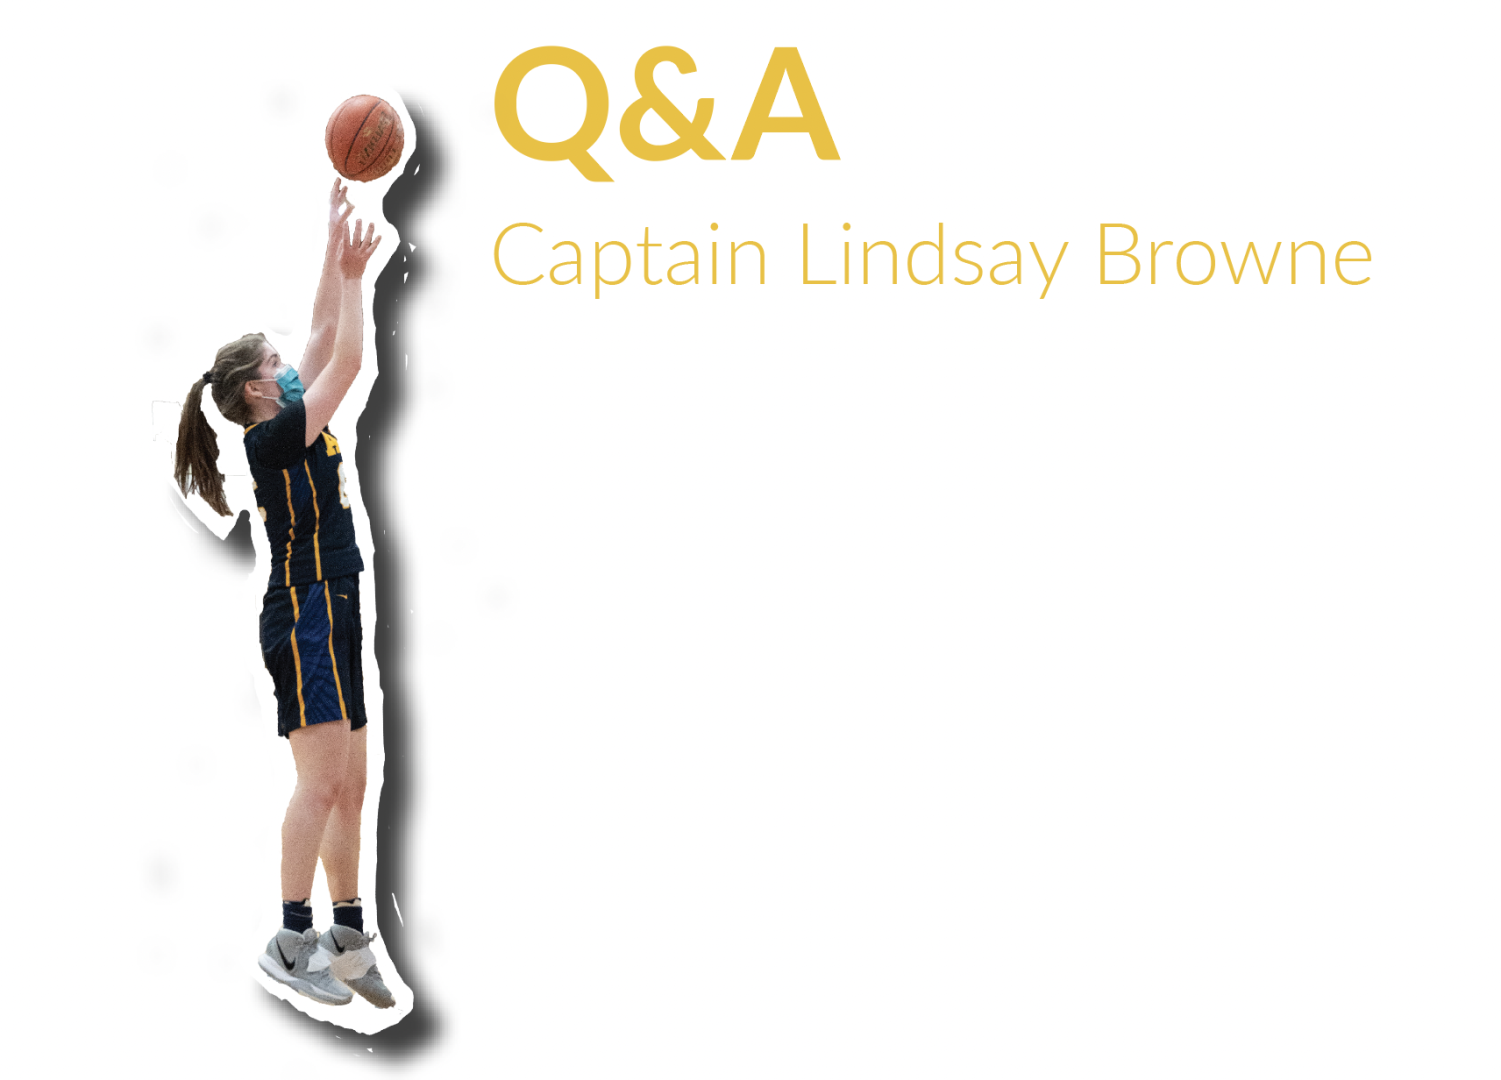 Q&A with captain Lindsay Browne